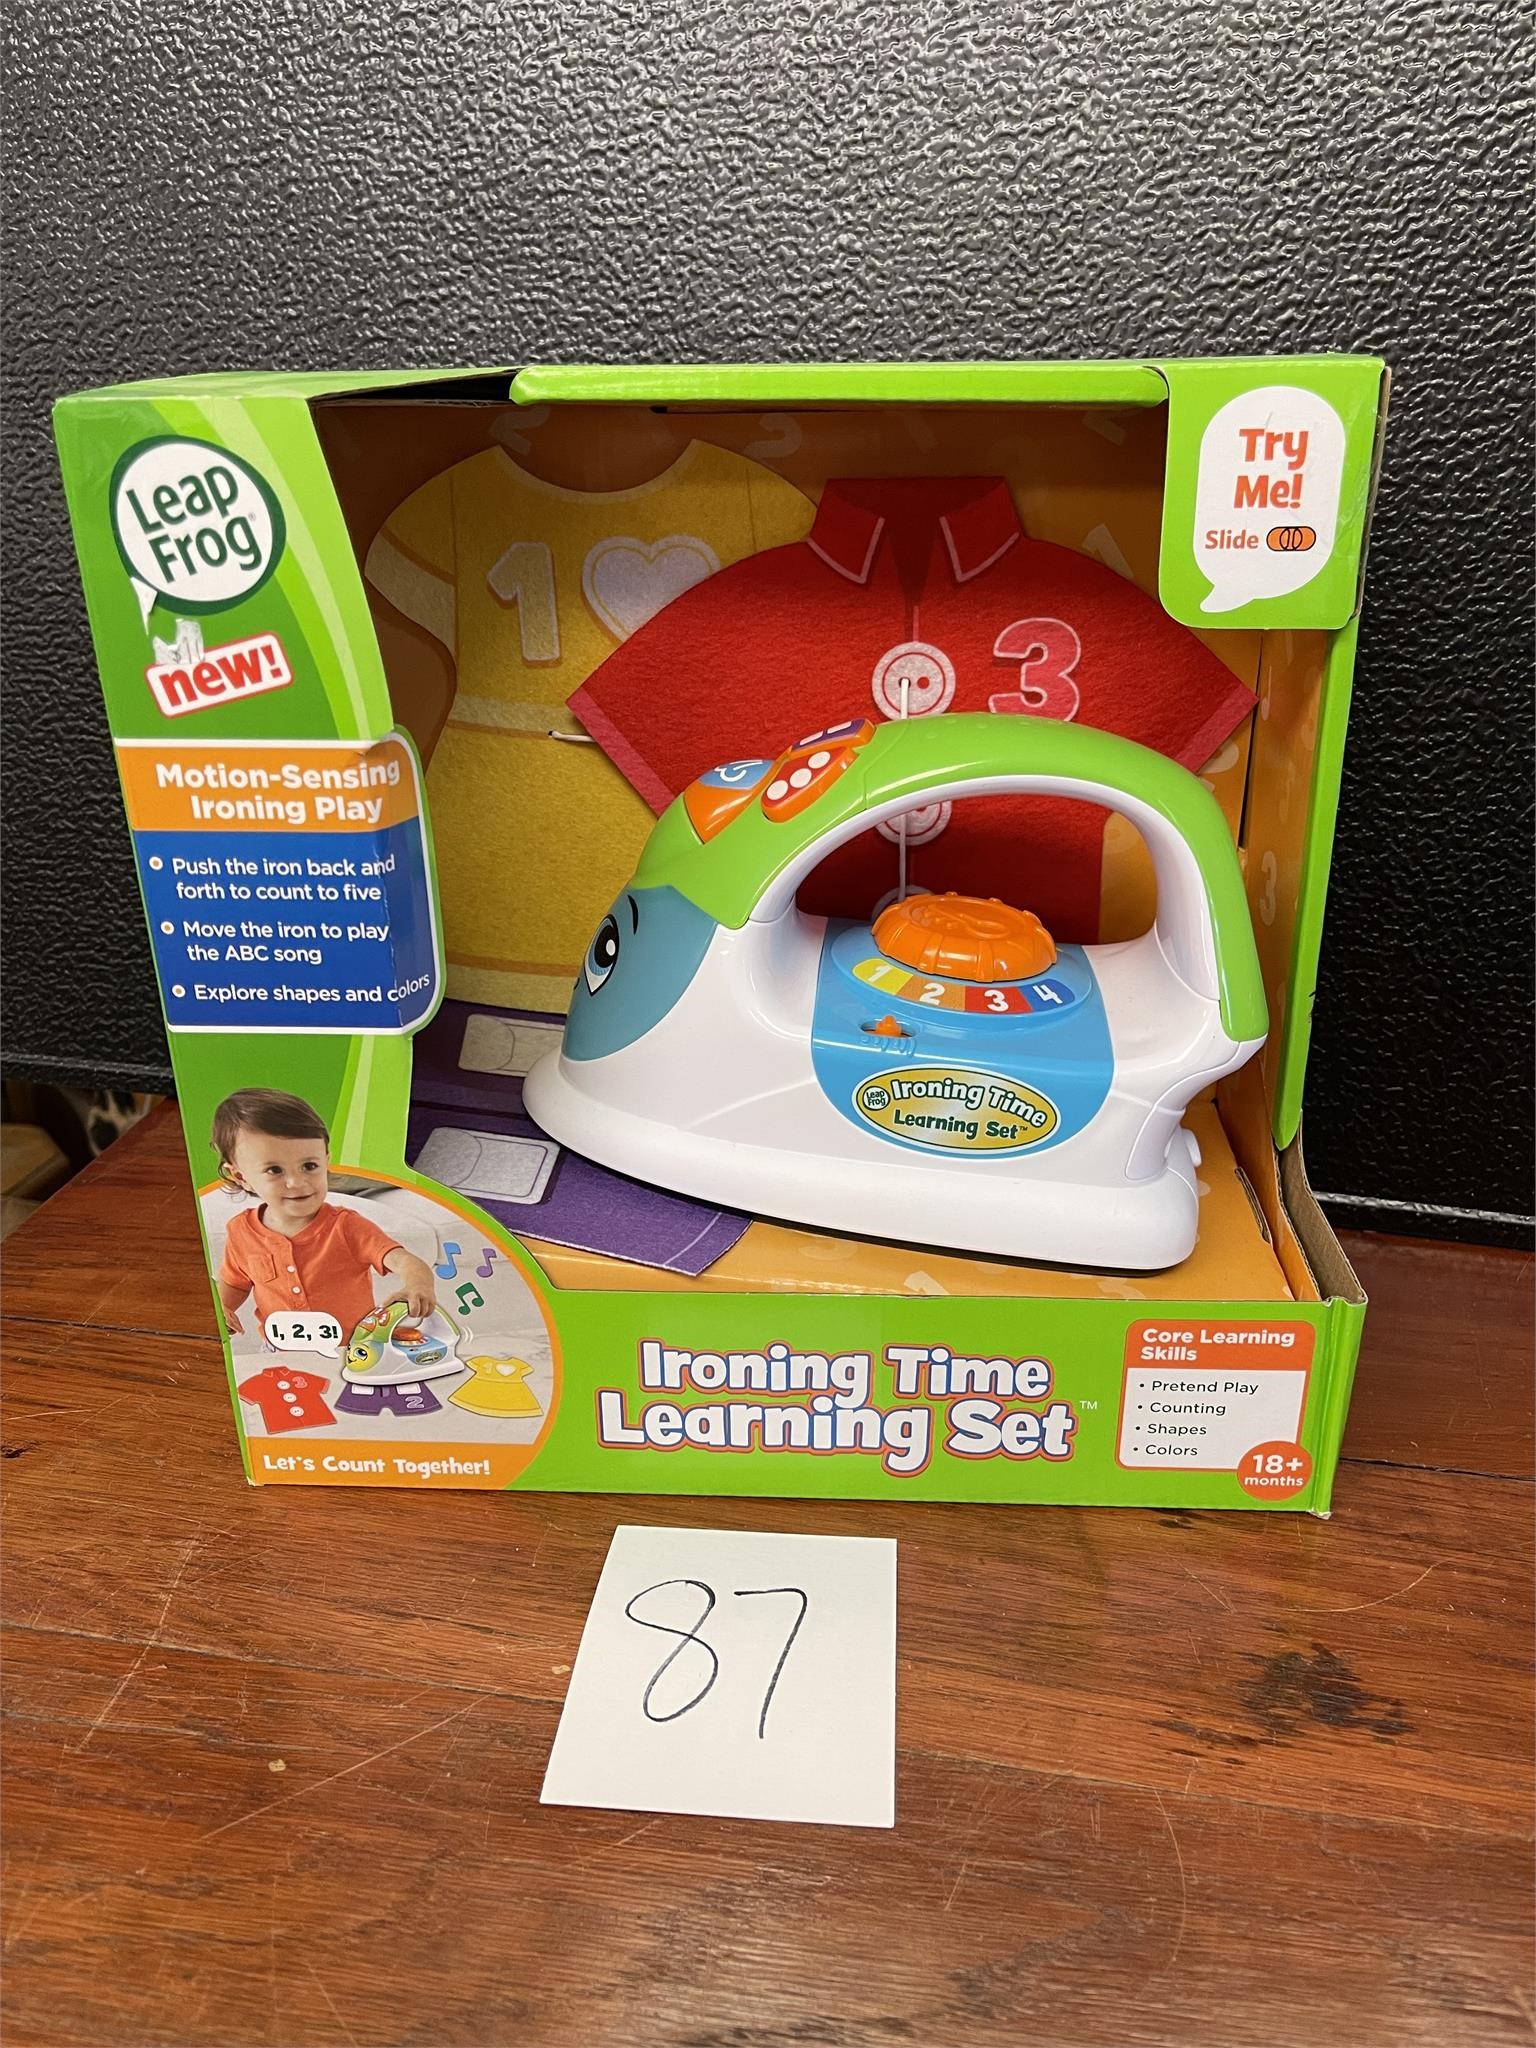 New Leap Frog ironing time learning set